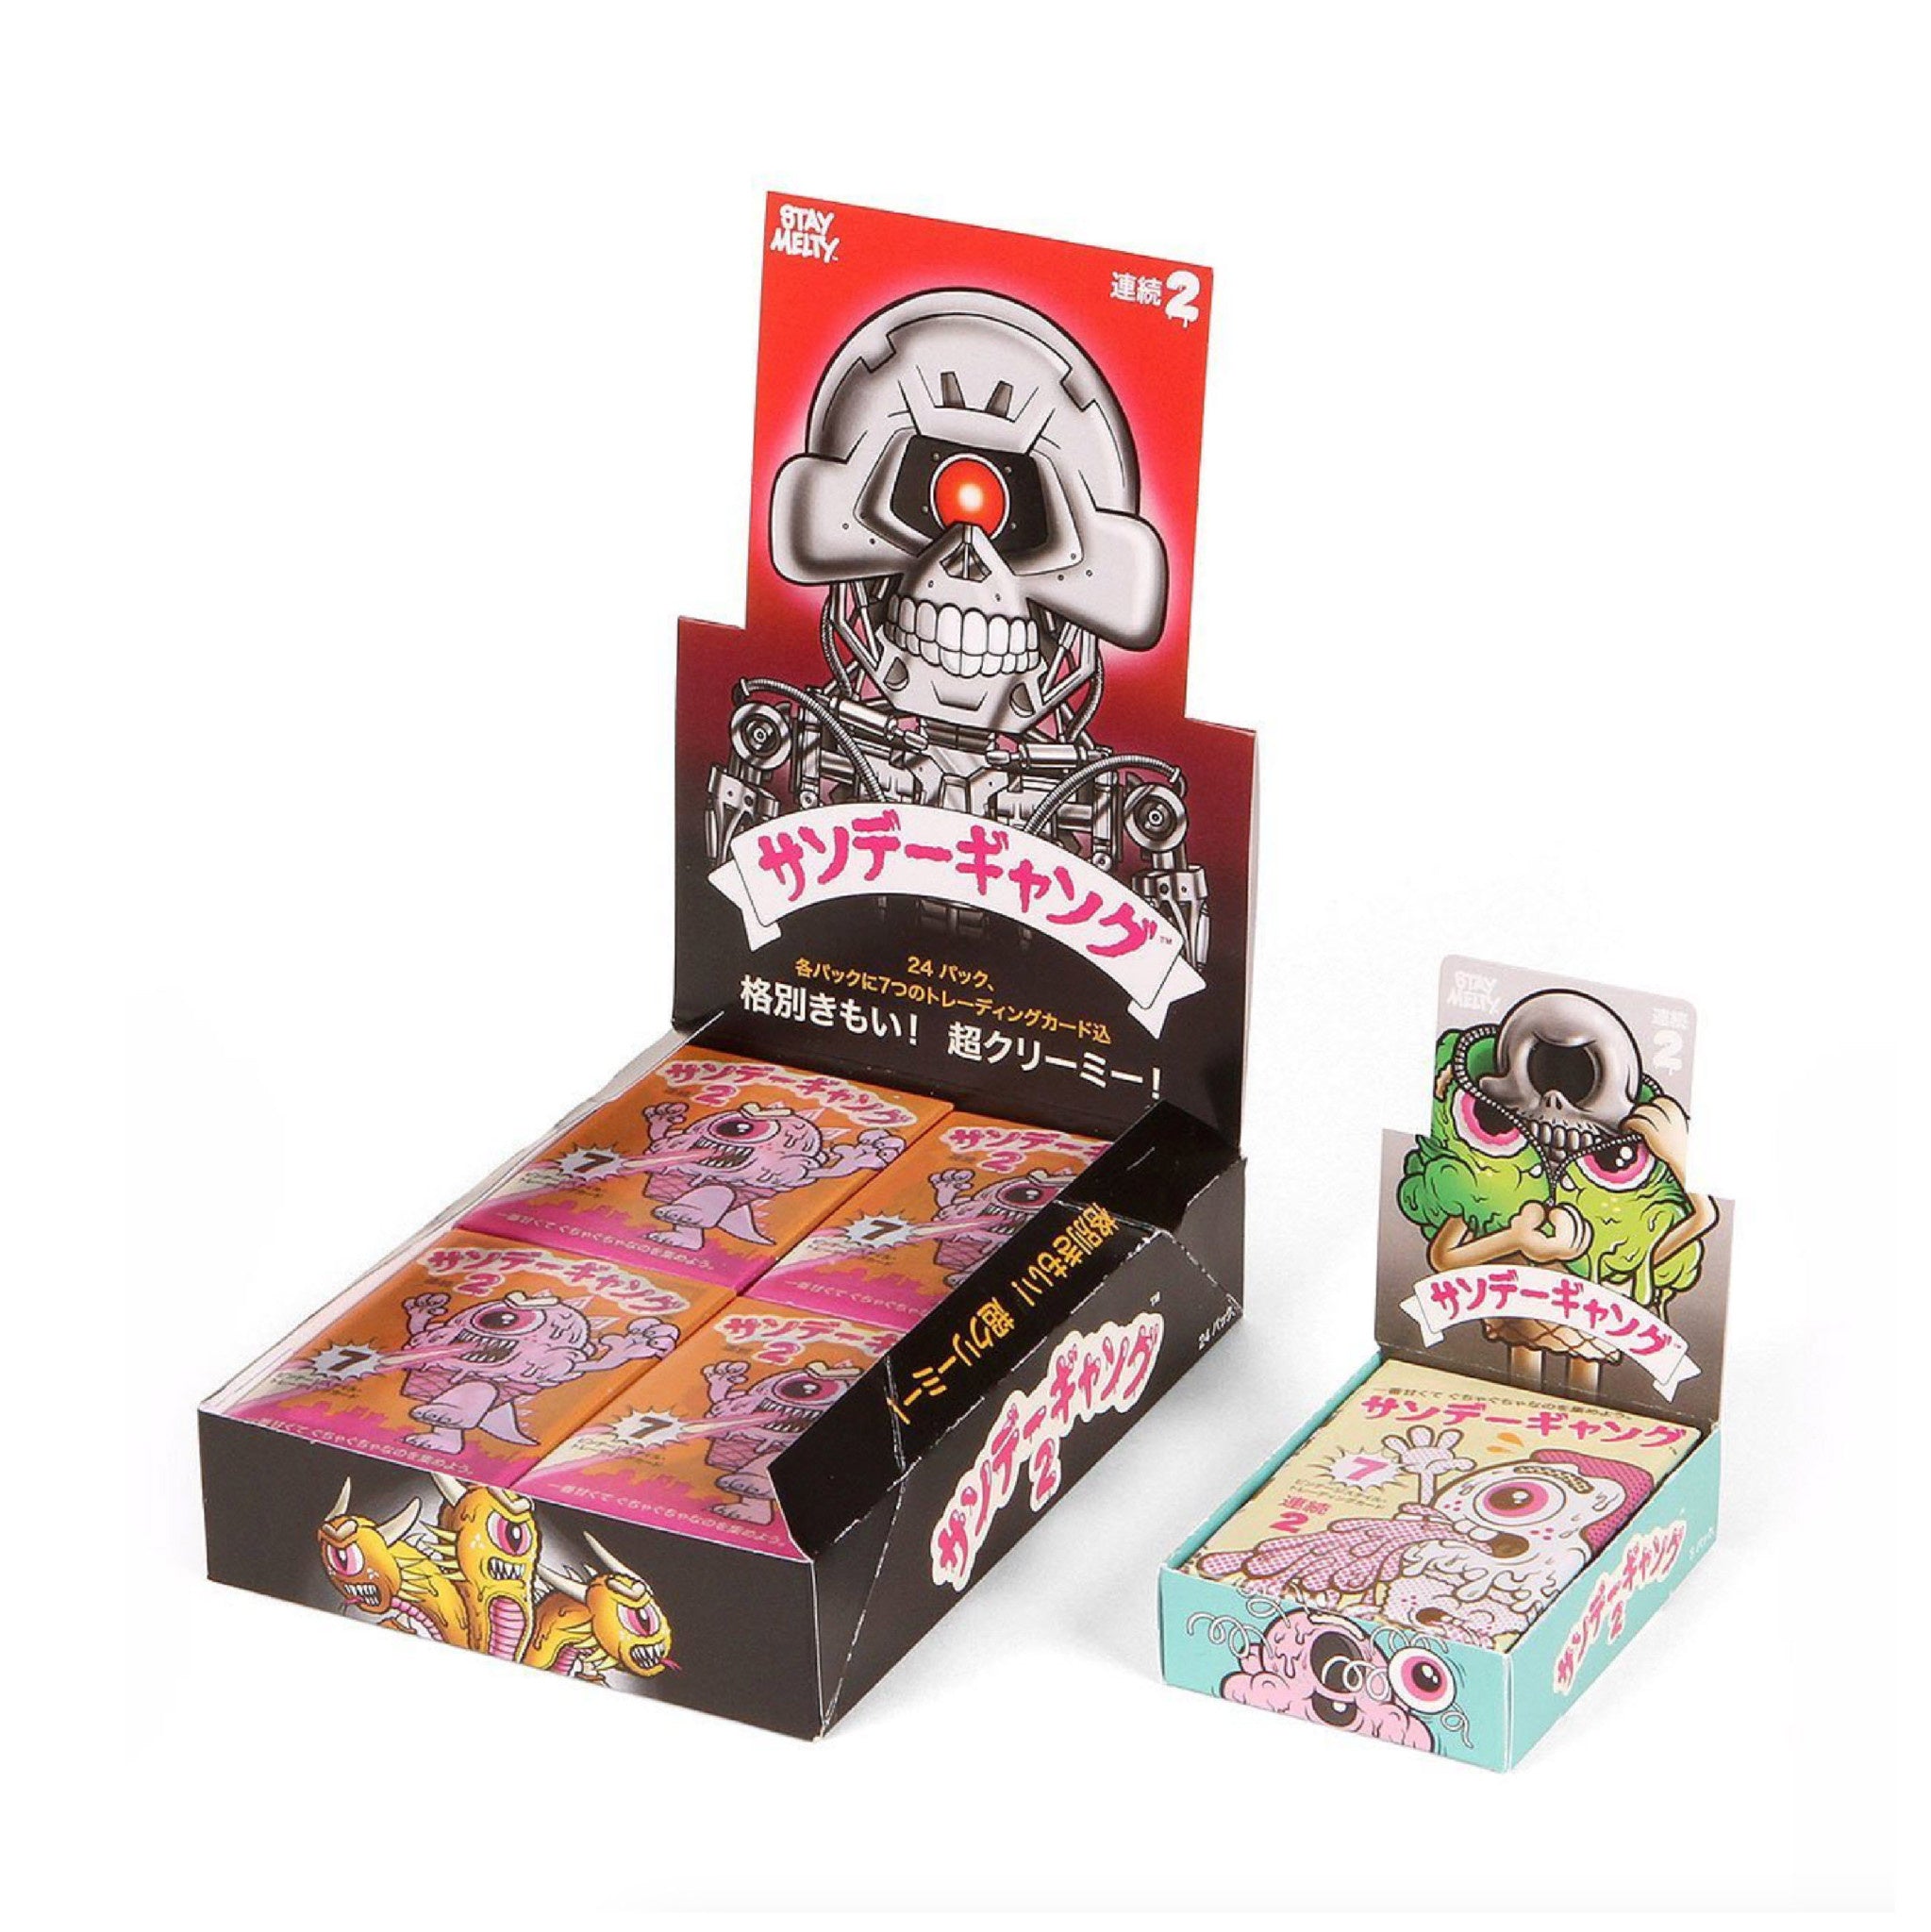 Japanese Series 2 Mini Melty Misfits by Buff Monster